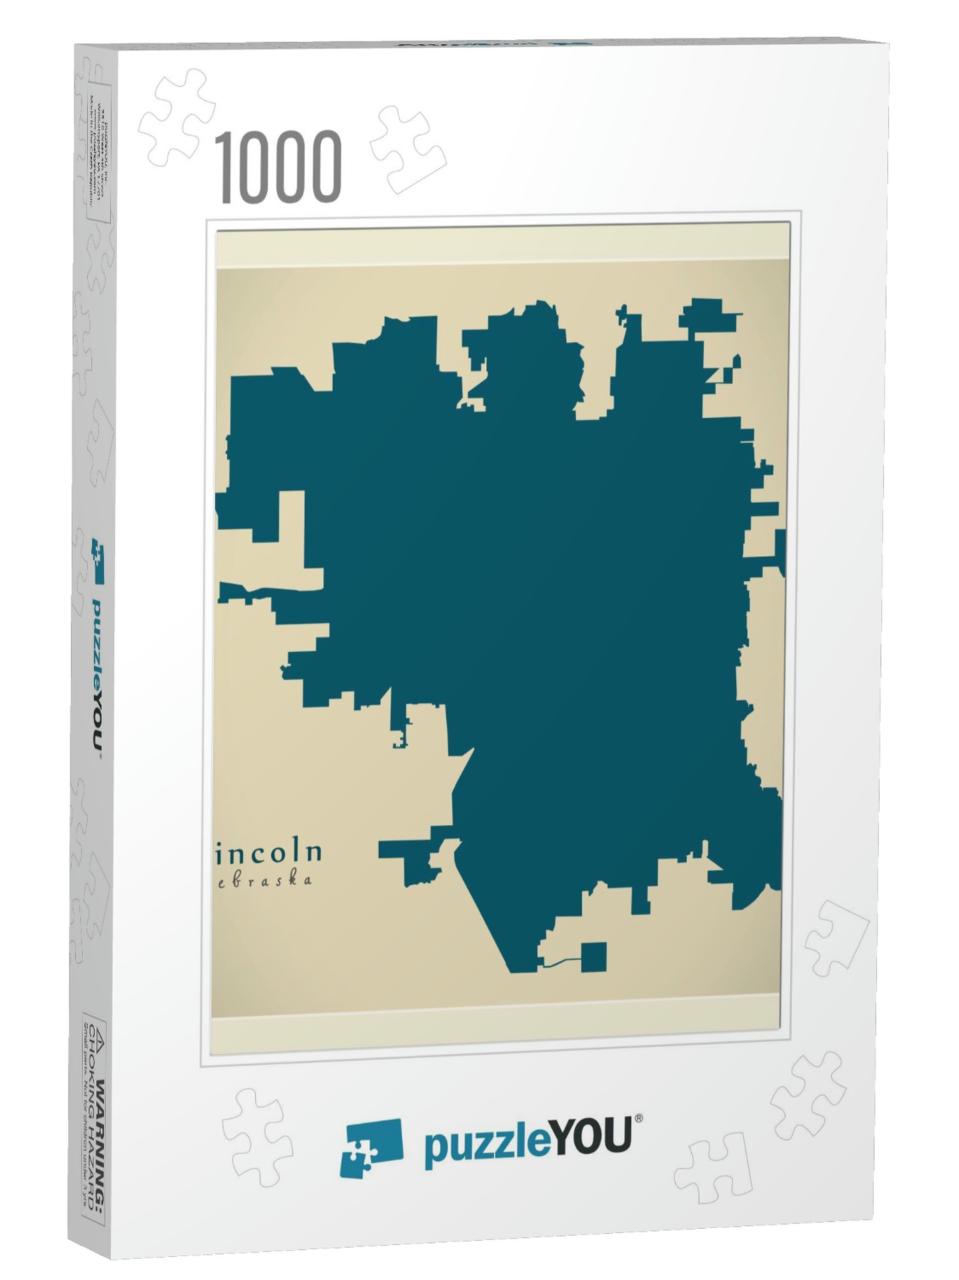 Modern City Map - Lincoln Nebraska City of the Usa... Jigsaw Puzzle with 1000 pieces